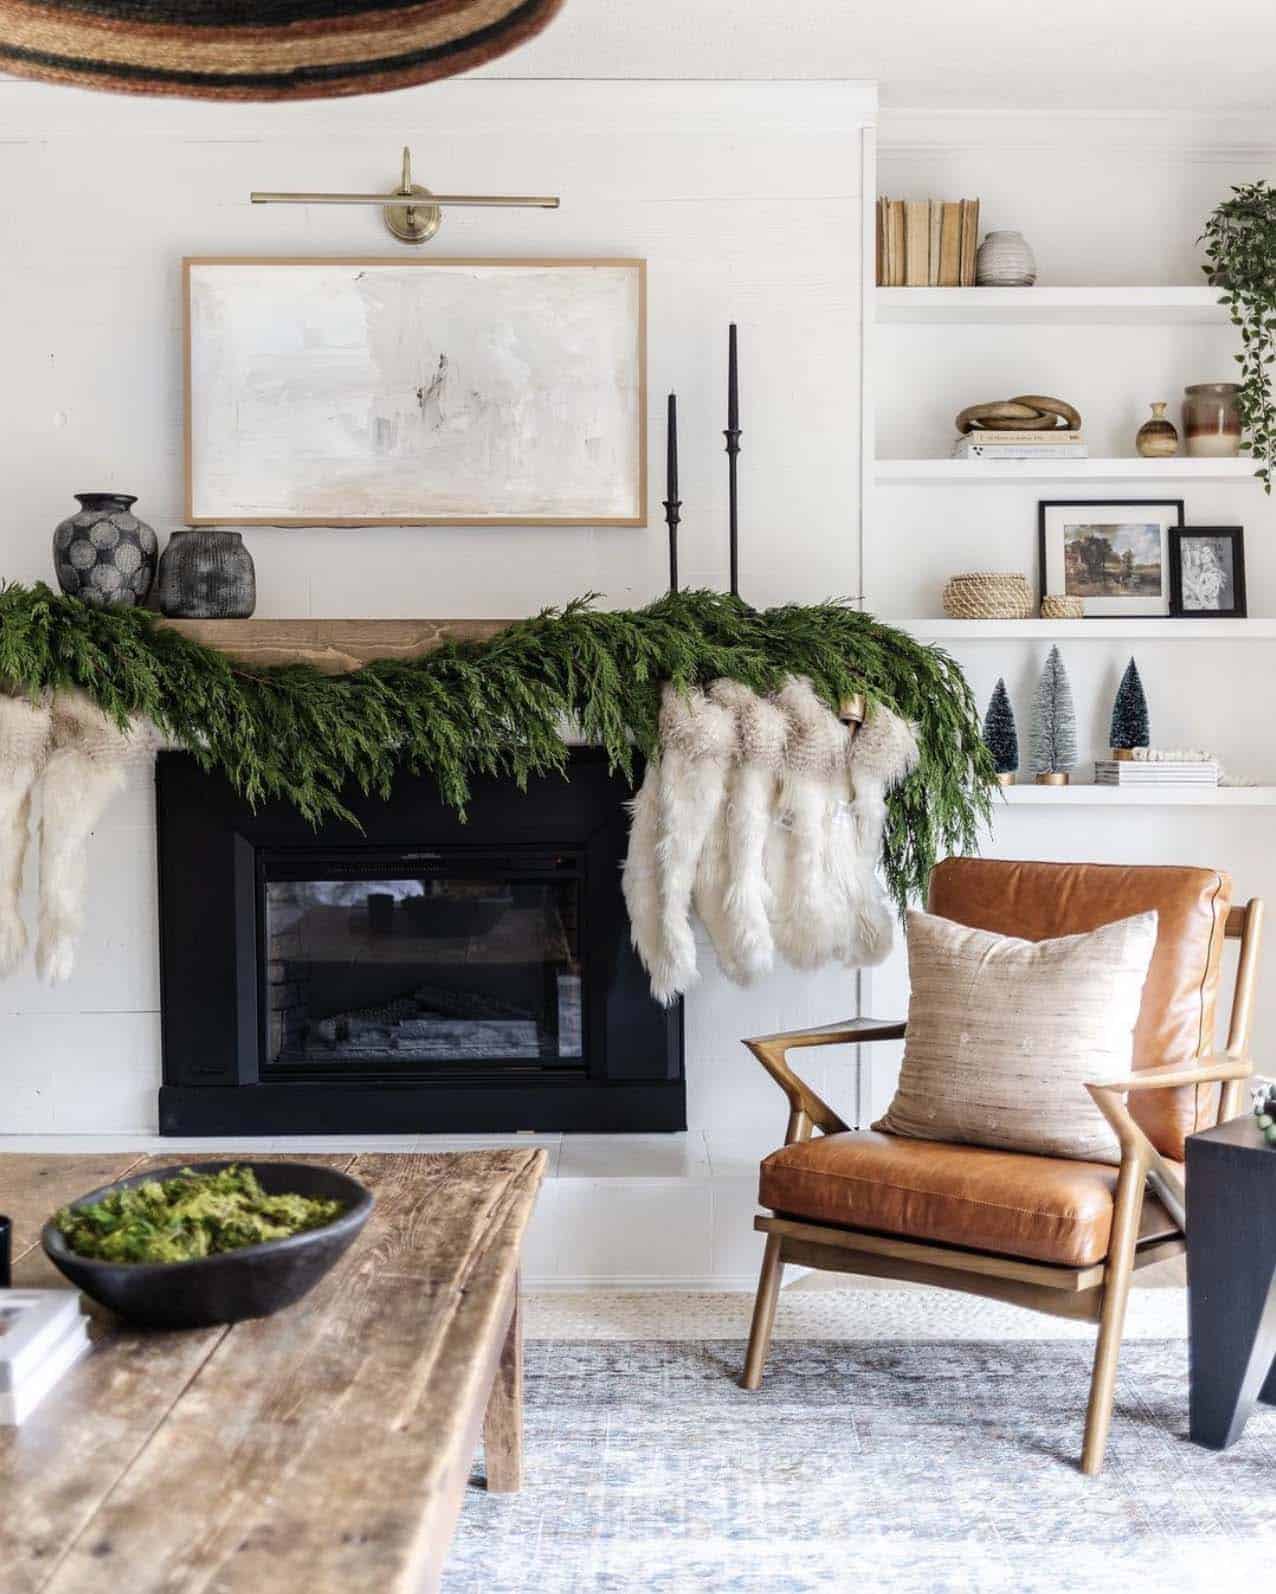 fresh-cypress-garland-on-the-fireplace-mantel-with-stockings